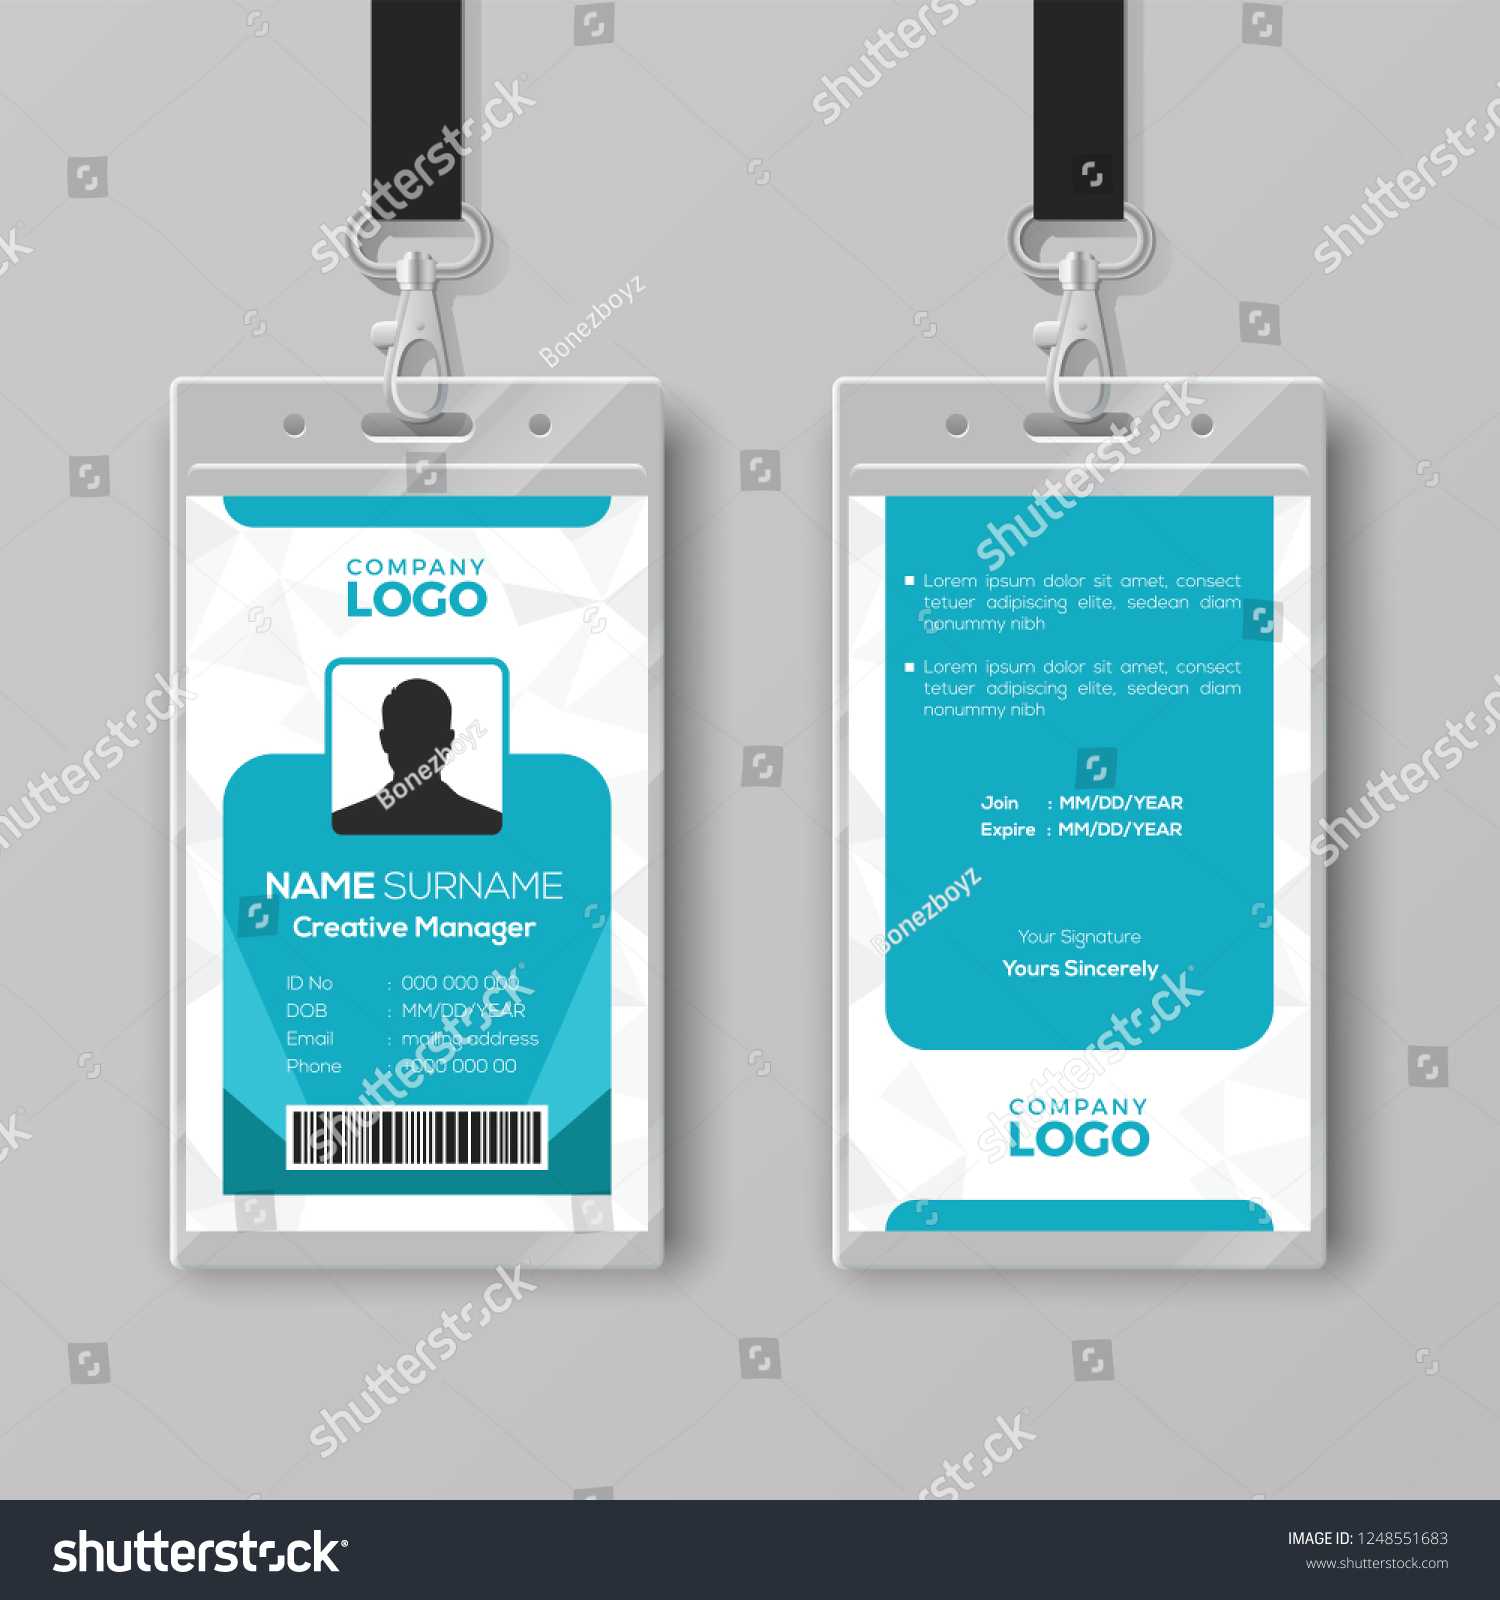 Corporate Id Card Design Template Stock Vector (Royalty Free Intended For Company Id Card Design Template